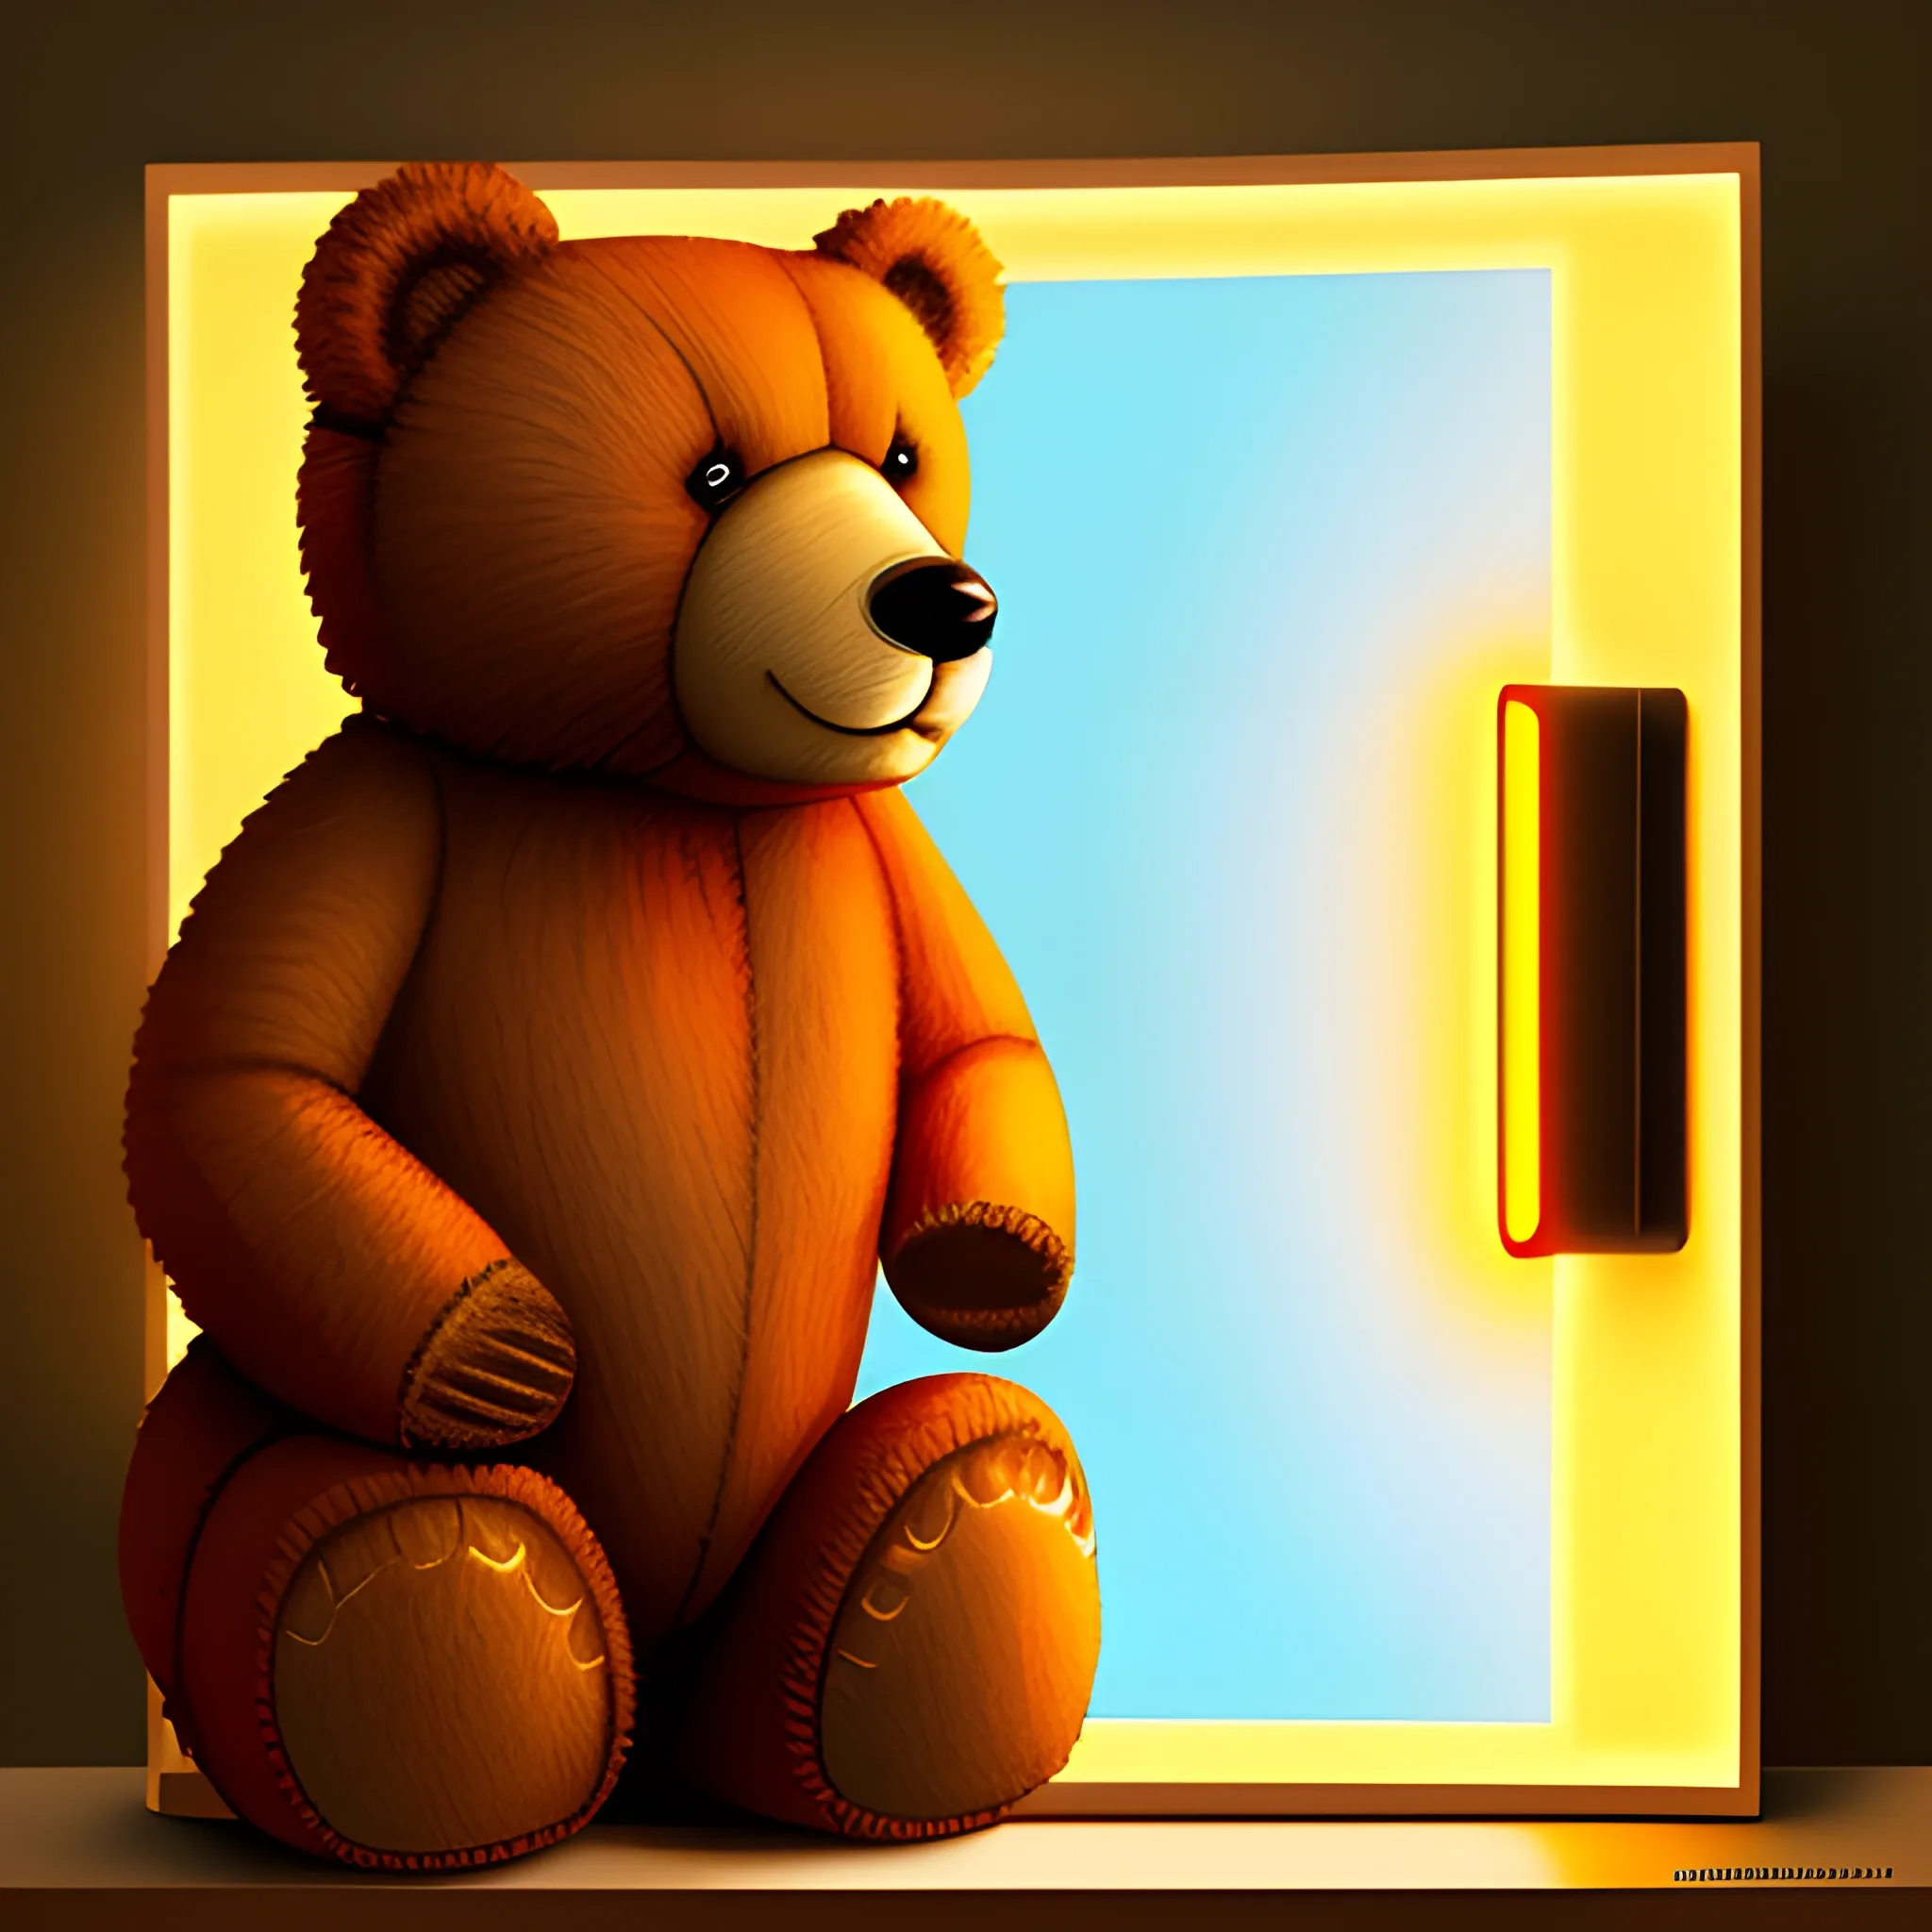 illustration of small teddy bear sitting looking to the side, side light illuminated face and front view, digital painting style with warm colors.